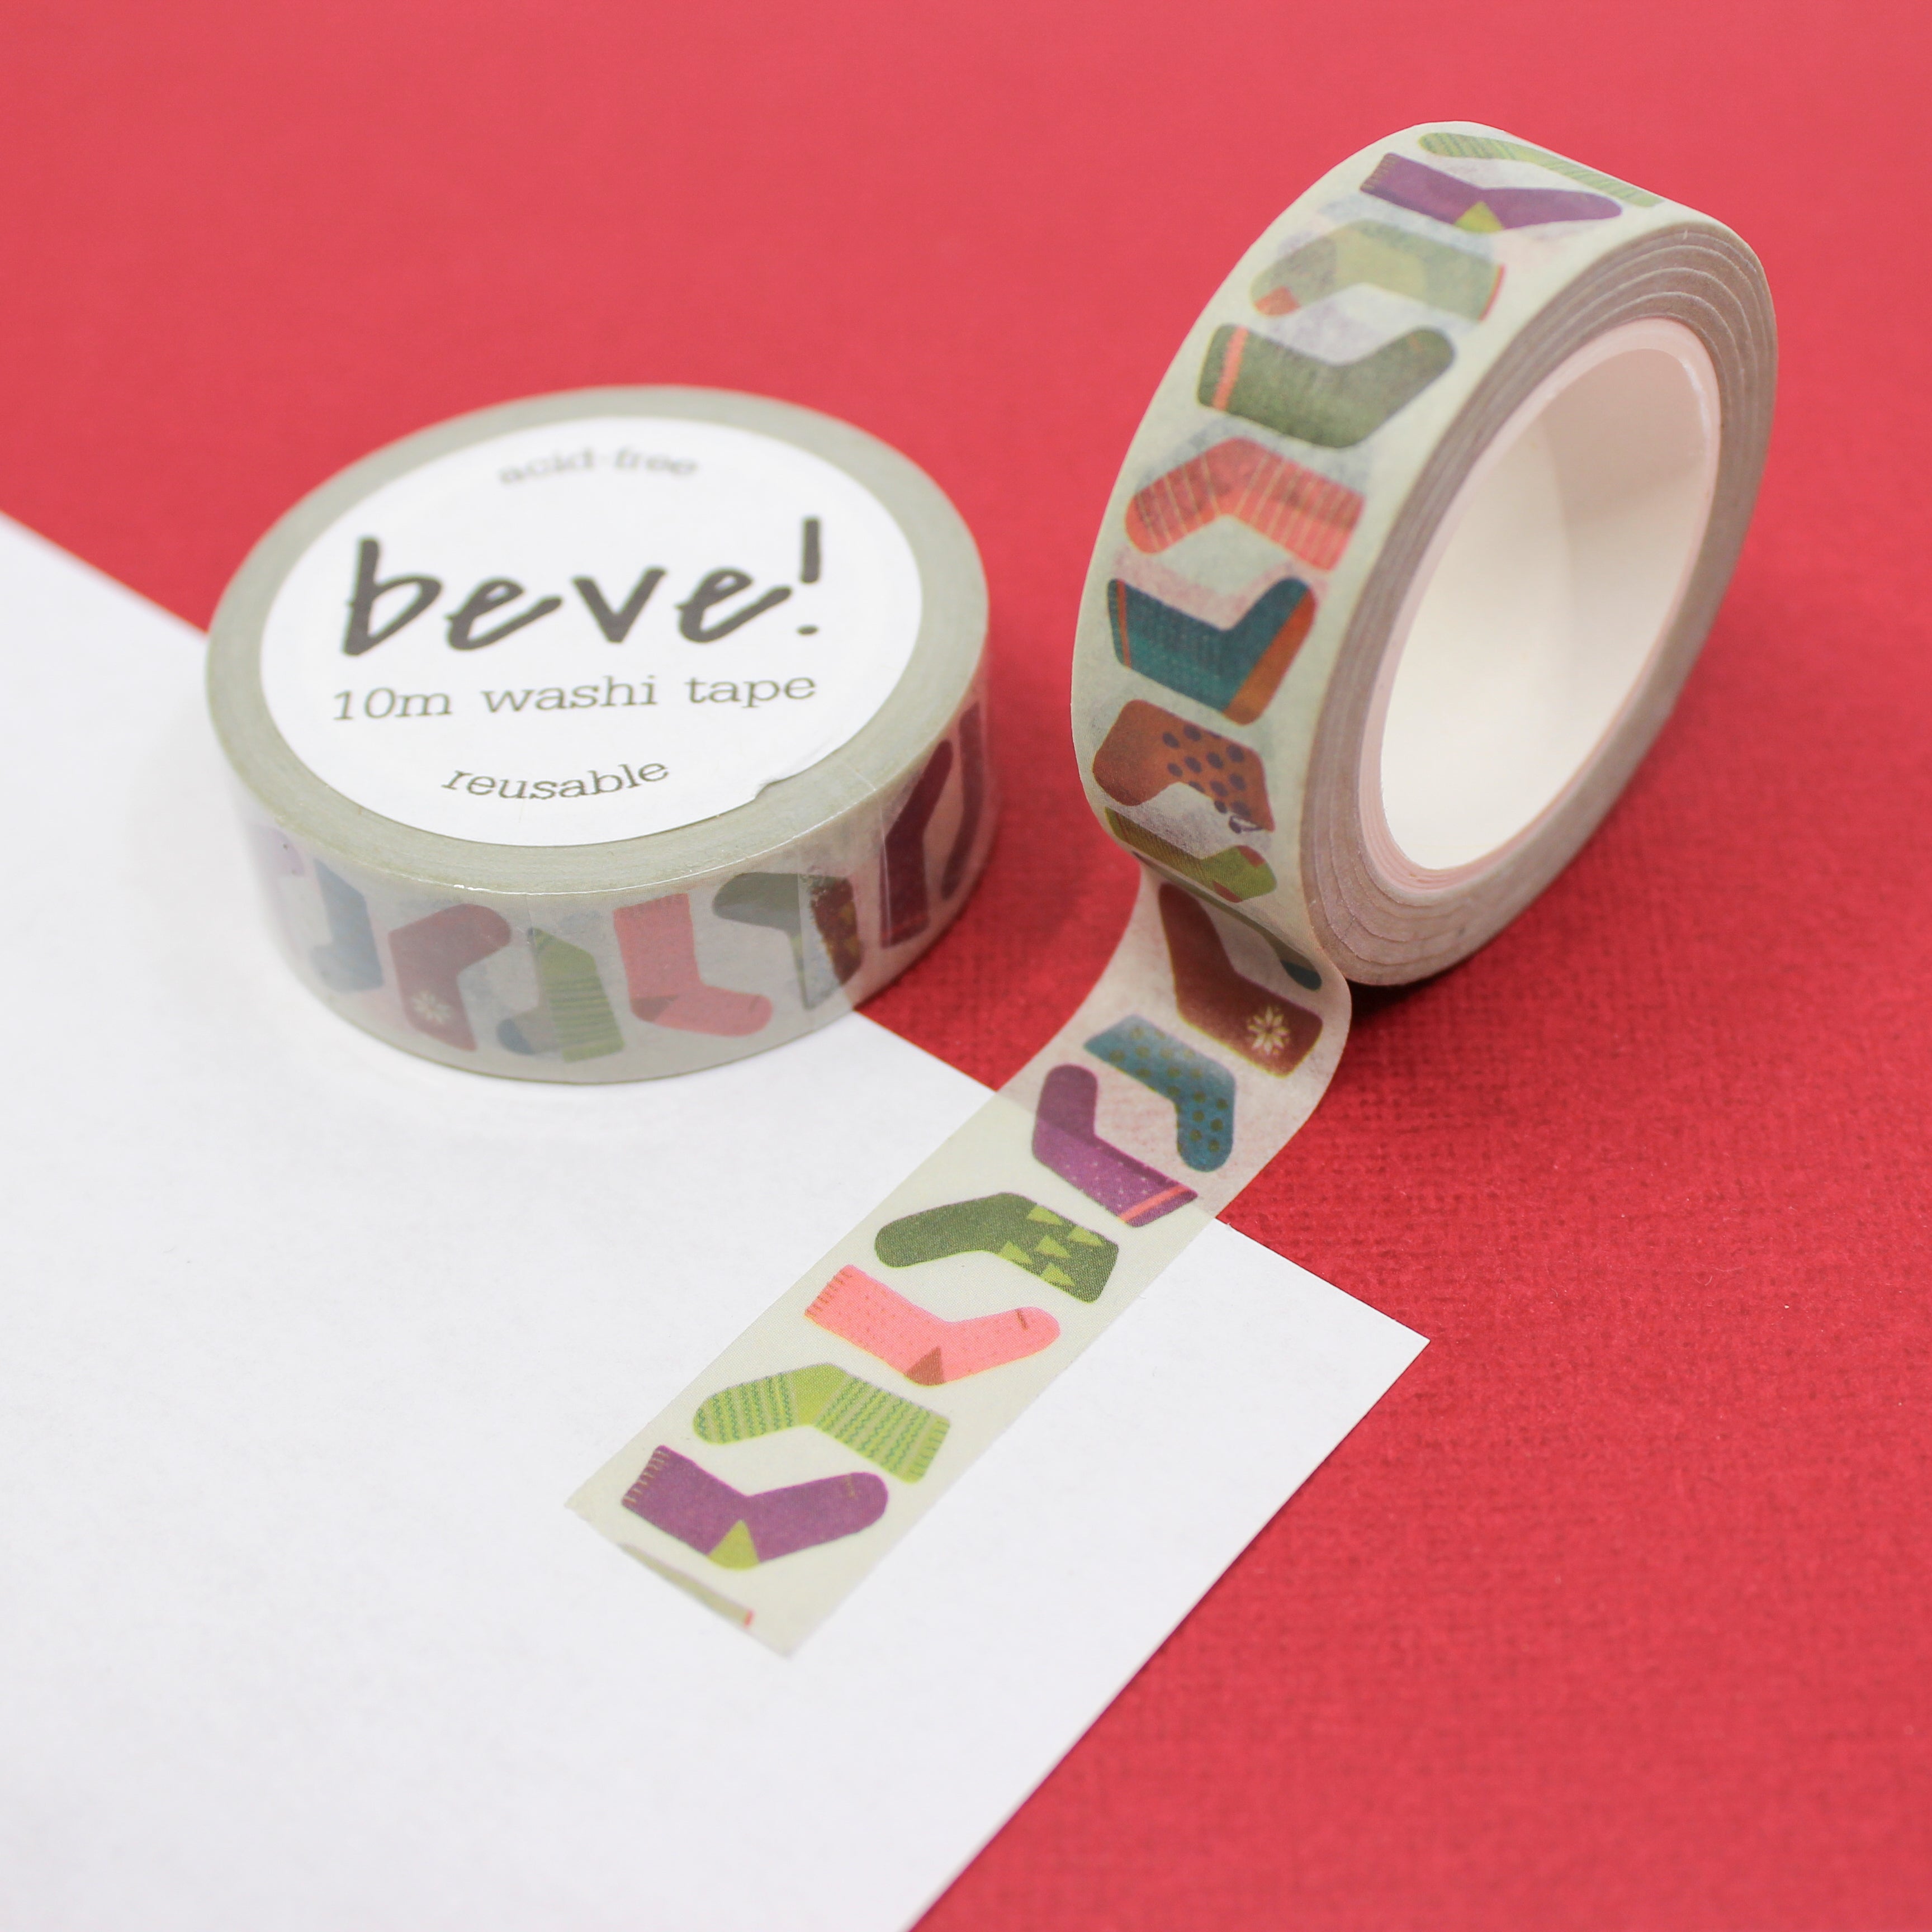 This is a colorful stockings pattern washi tape from BBB Supplies Craft Shop